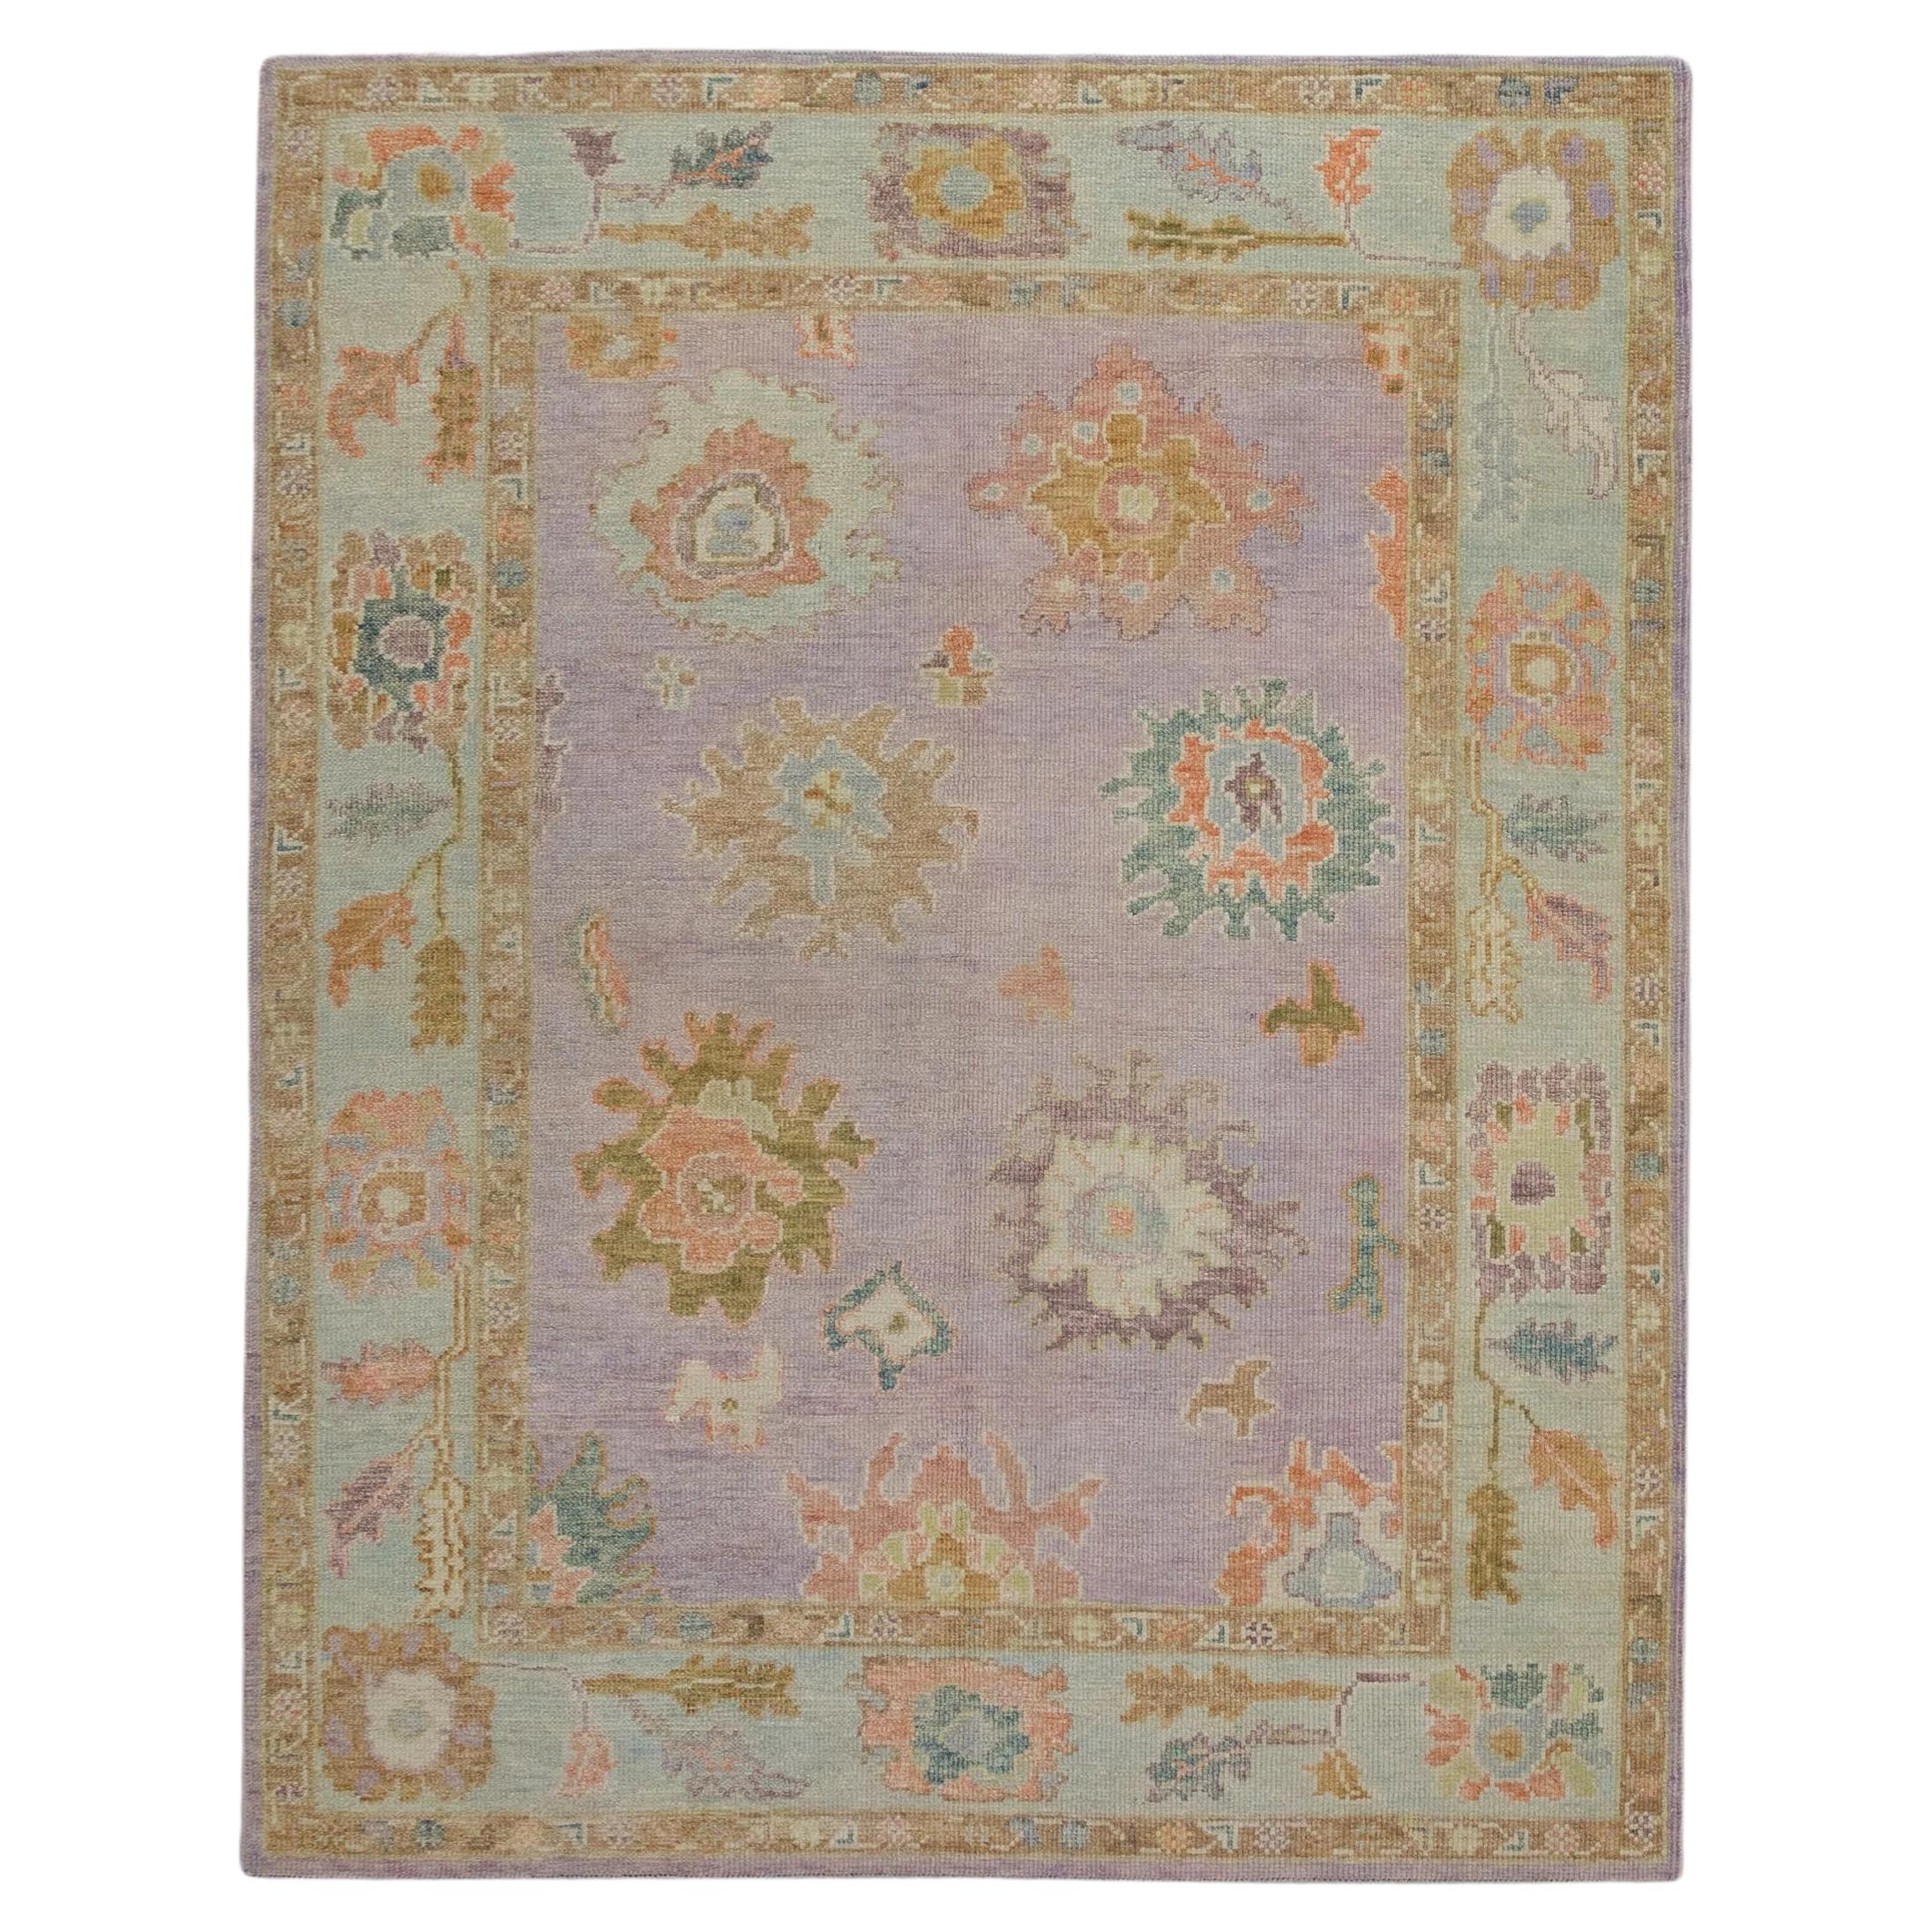 Soft Purple Handwoven Wool Turkish Oushak Rug w/ Colorful Floral Design 5'1x6'8